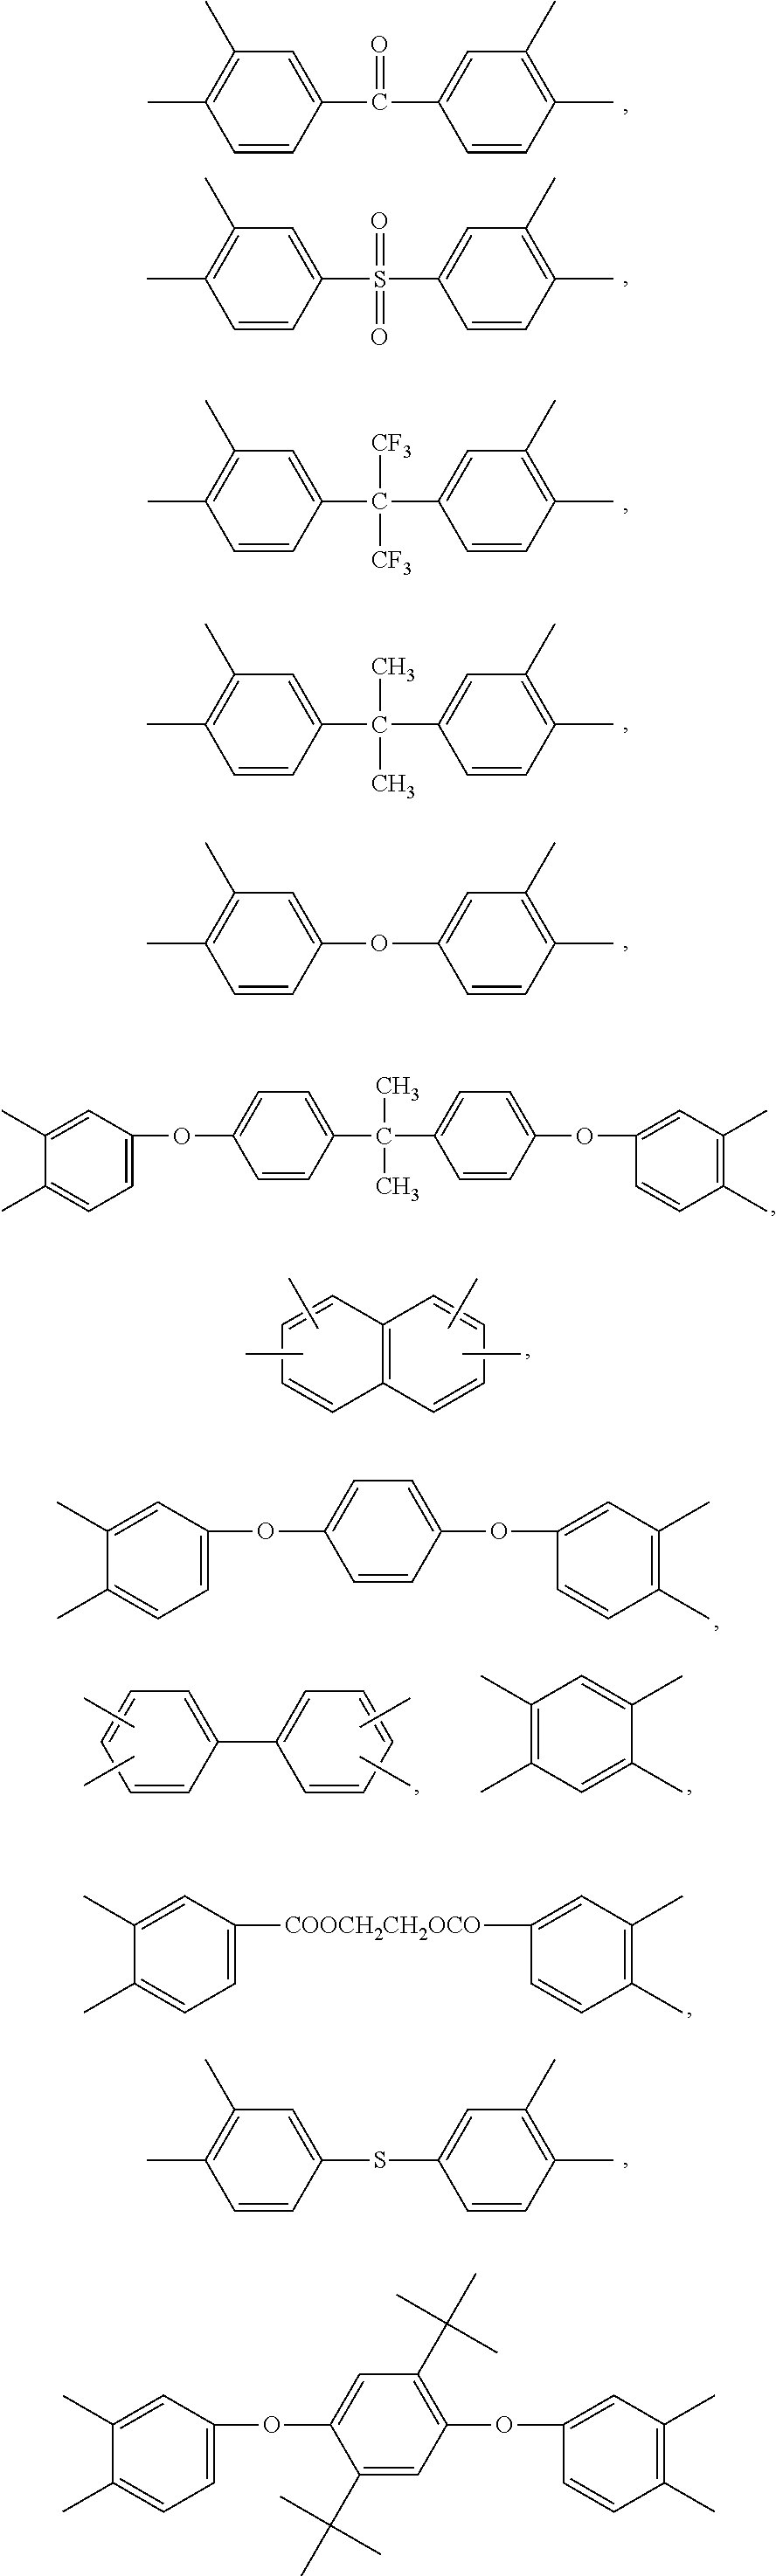 Process of separating gases using polyimide membranes